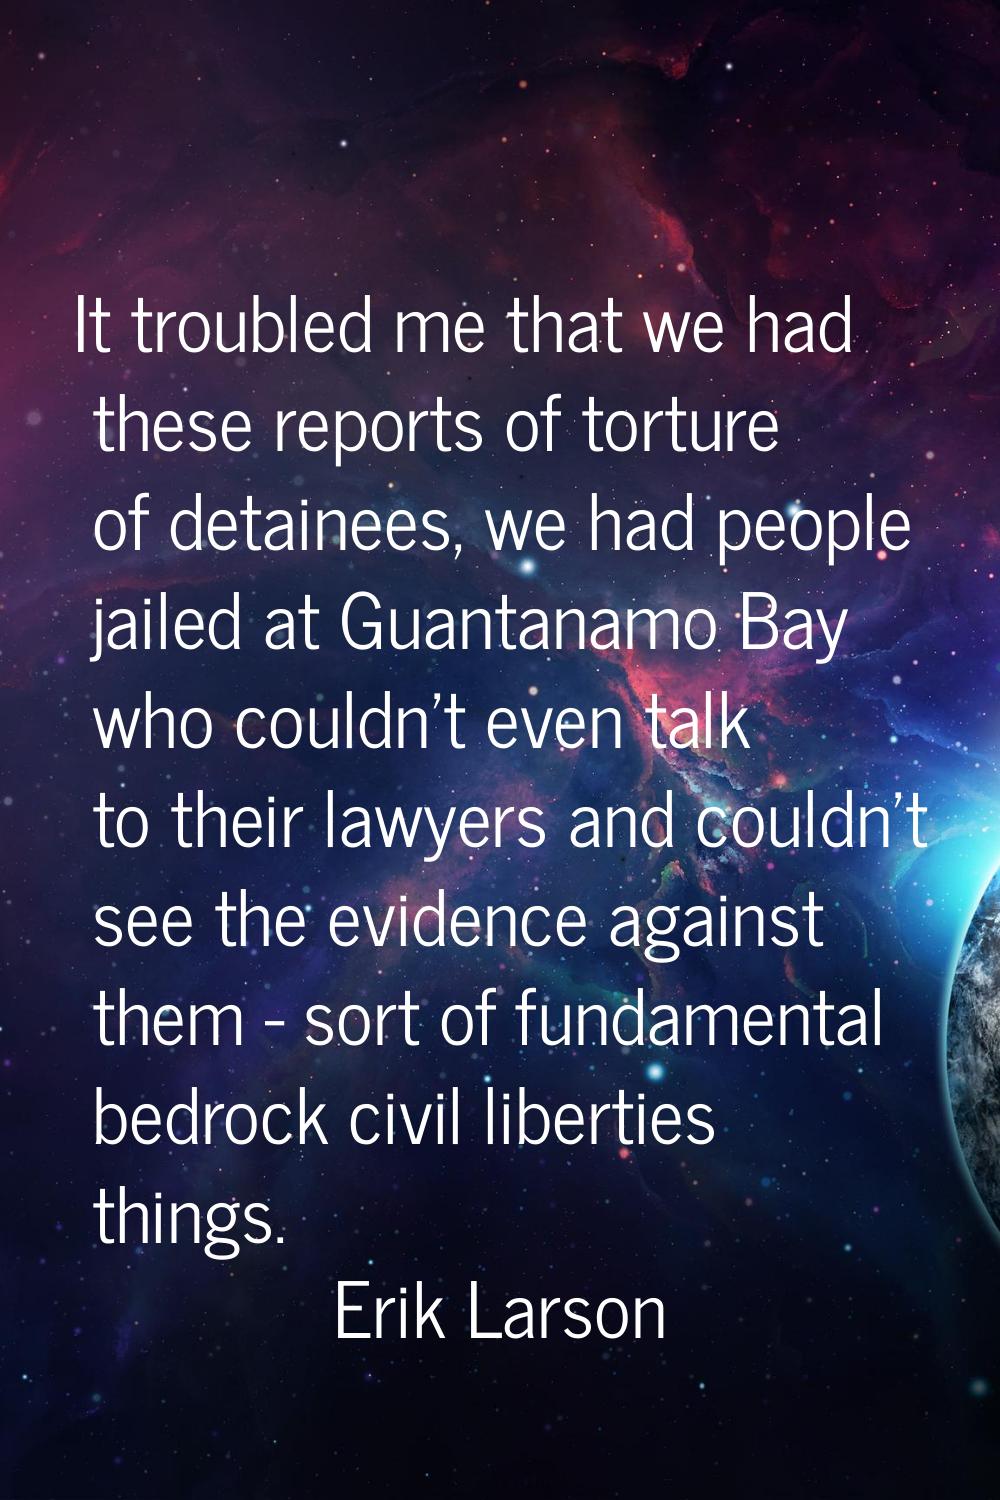 It troubled me that we had these reports of torture of detainees, we had people jailed at Guantanam